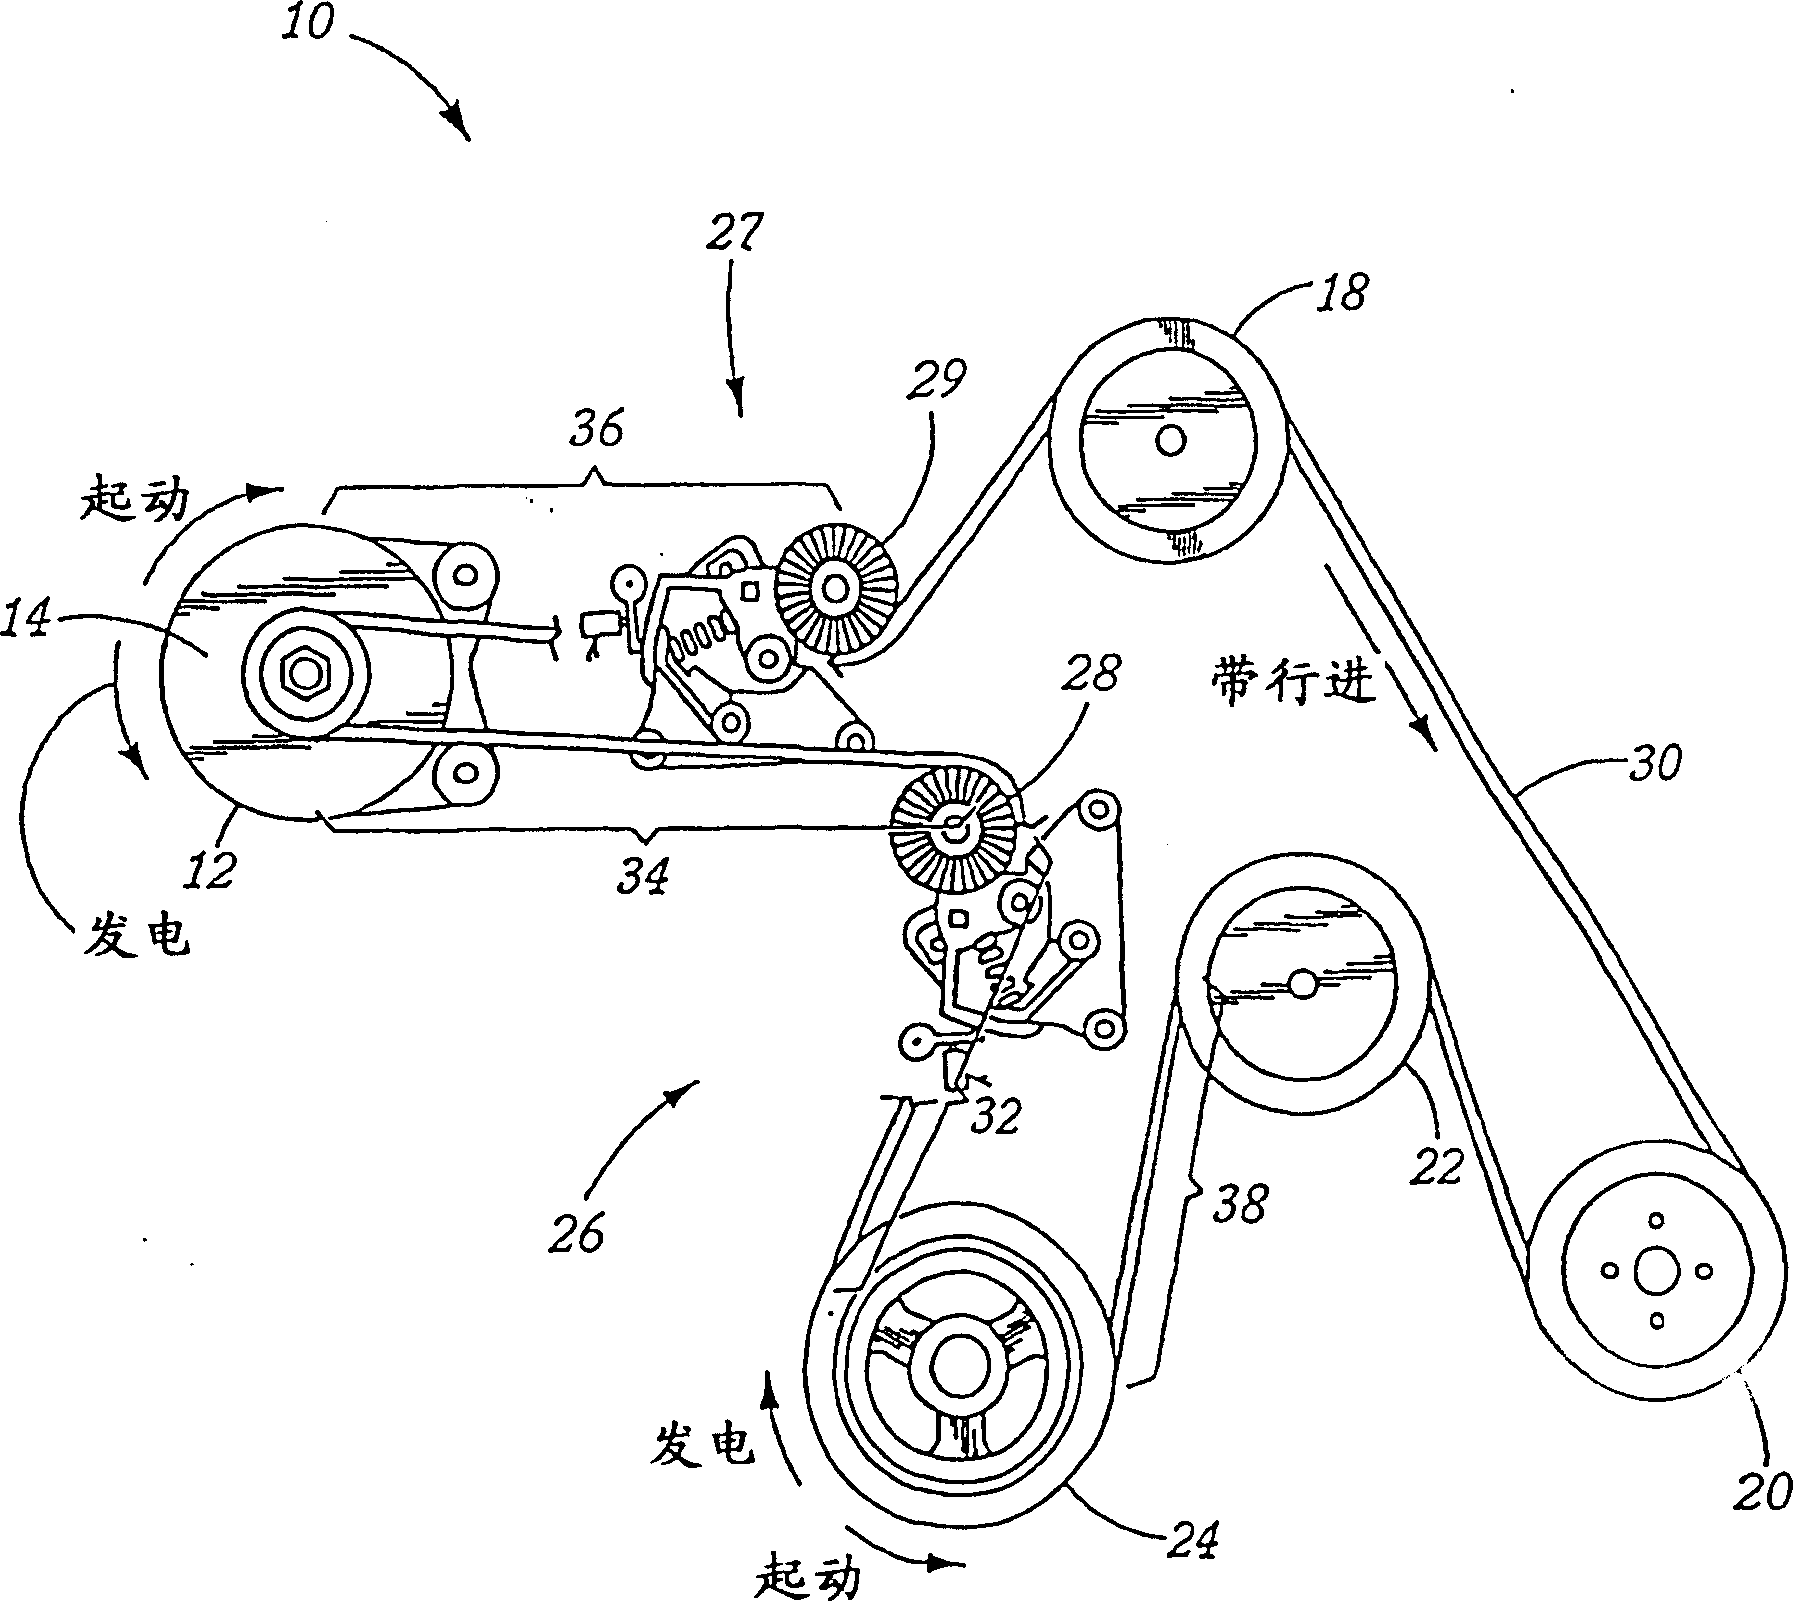 Motor/generator and accessory belt drive system